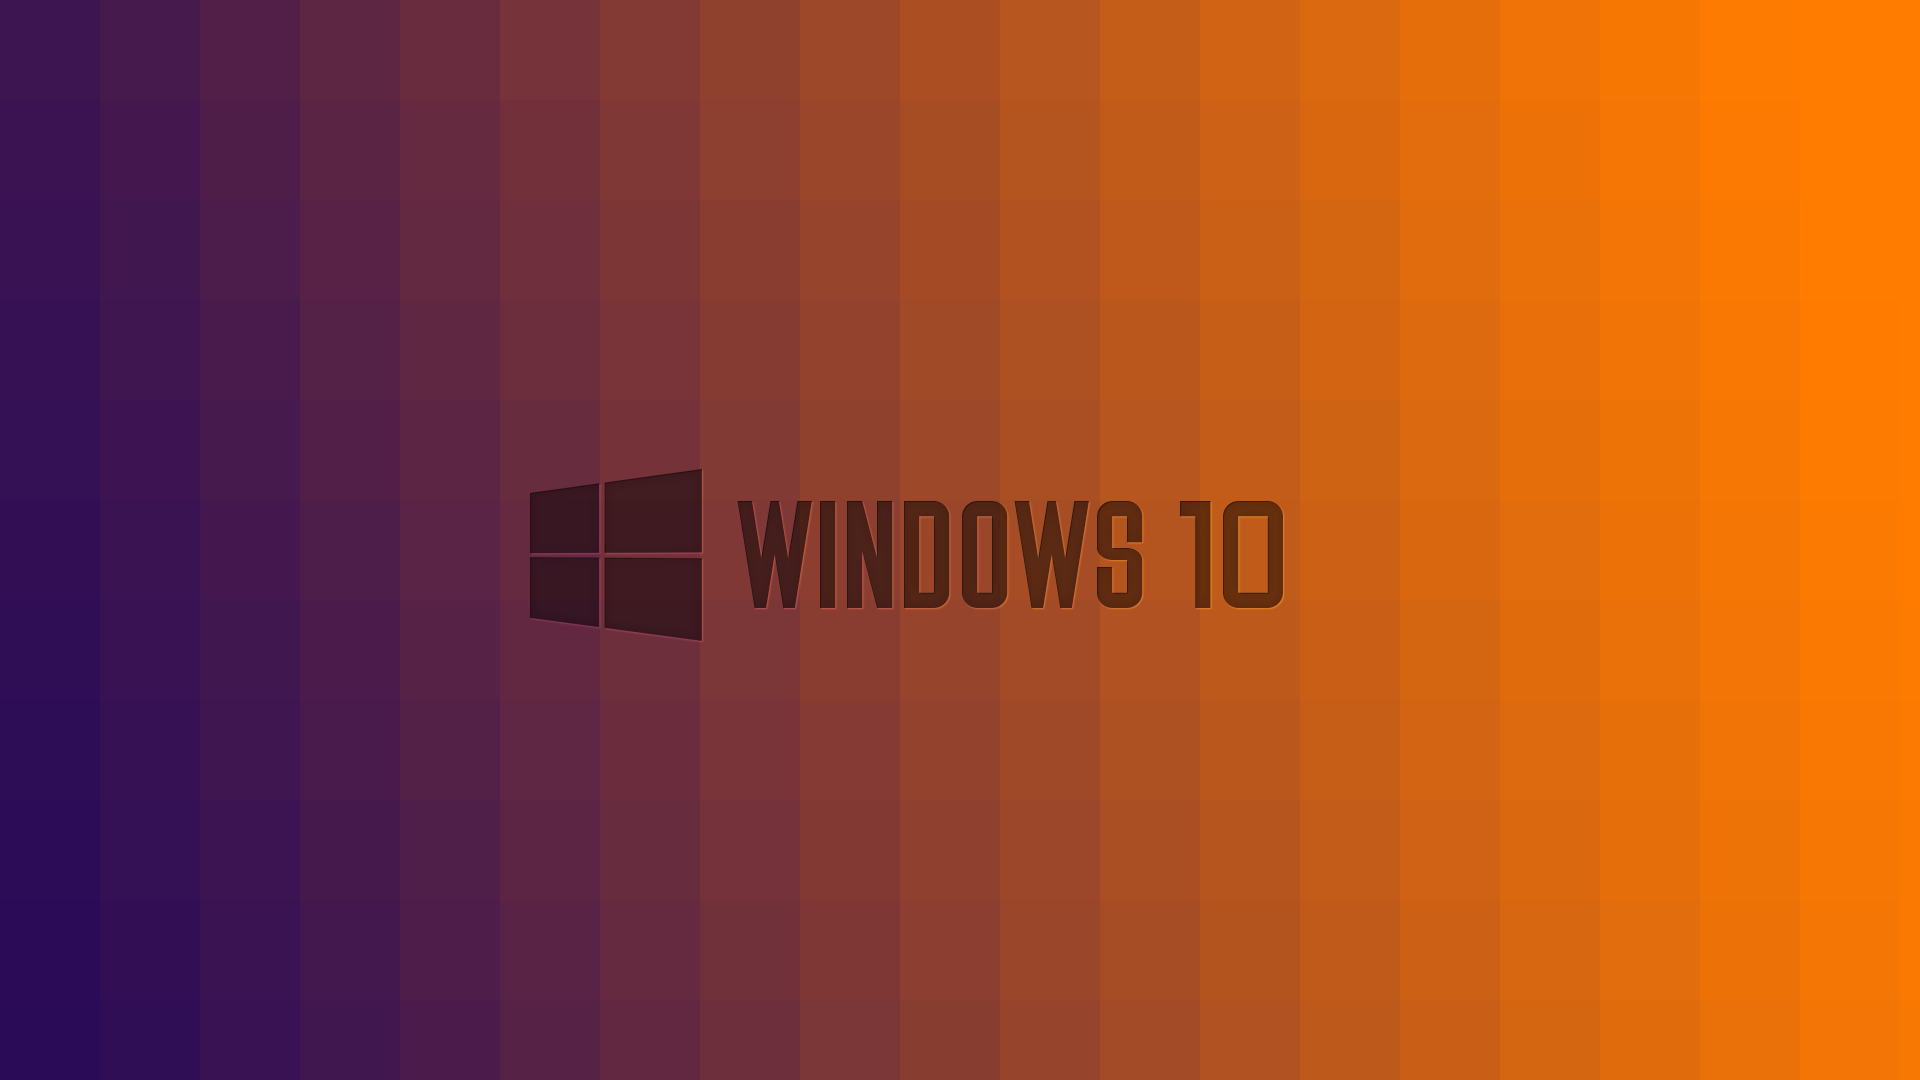 Windows 10 Logo Wallpaper and Theme Pack All for Windows 10 Free